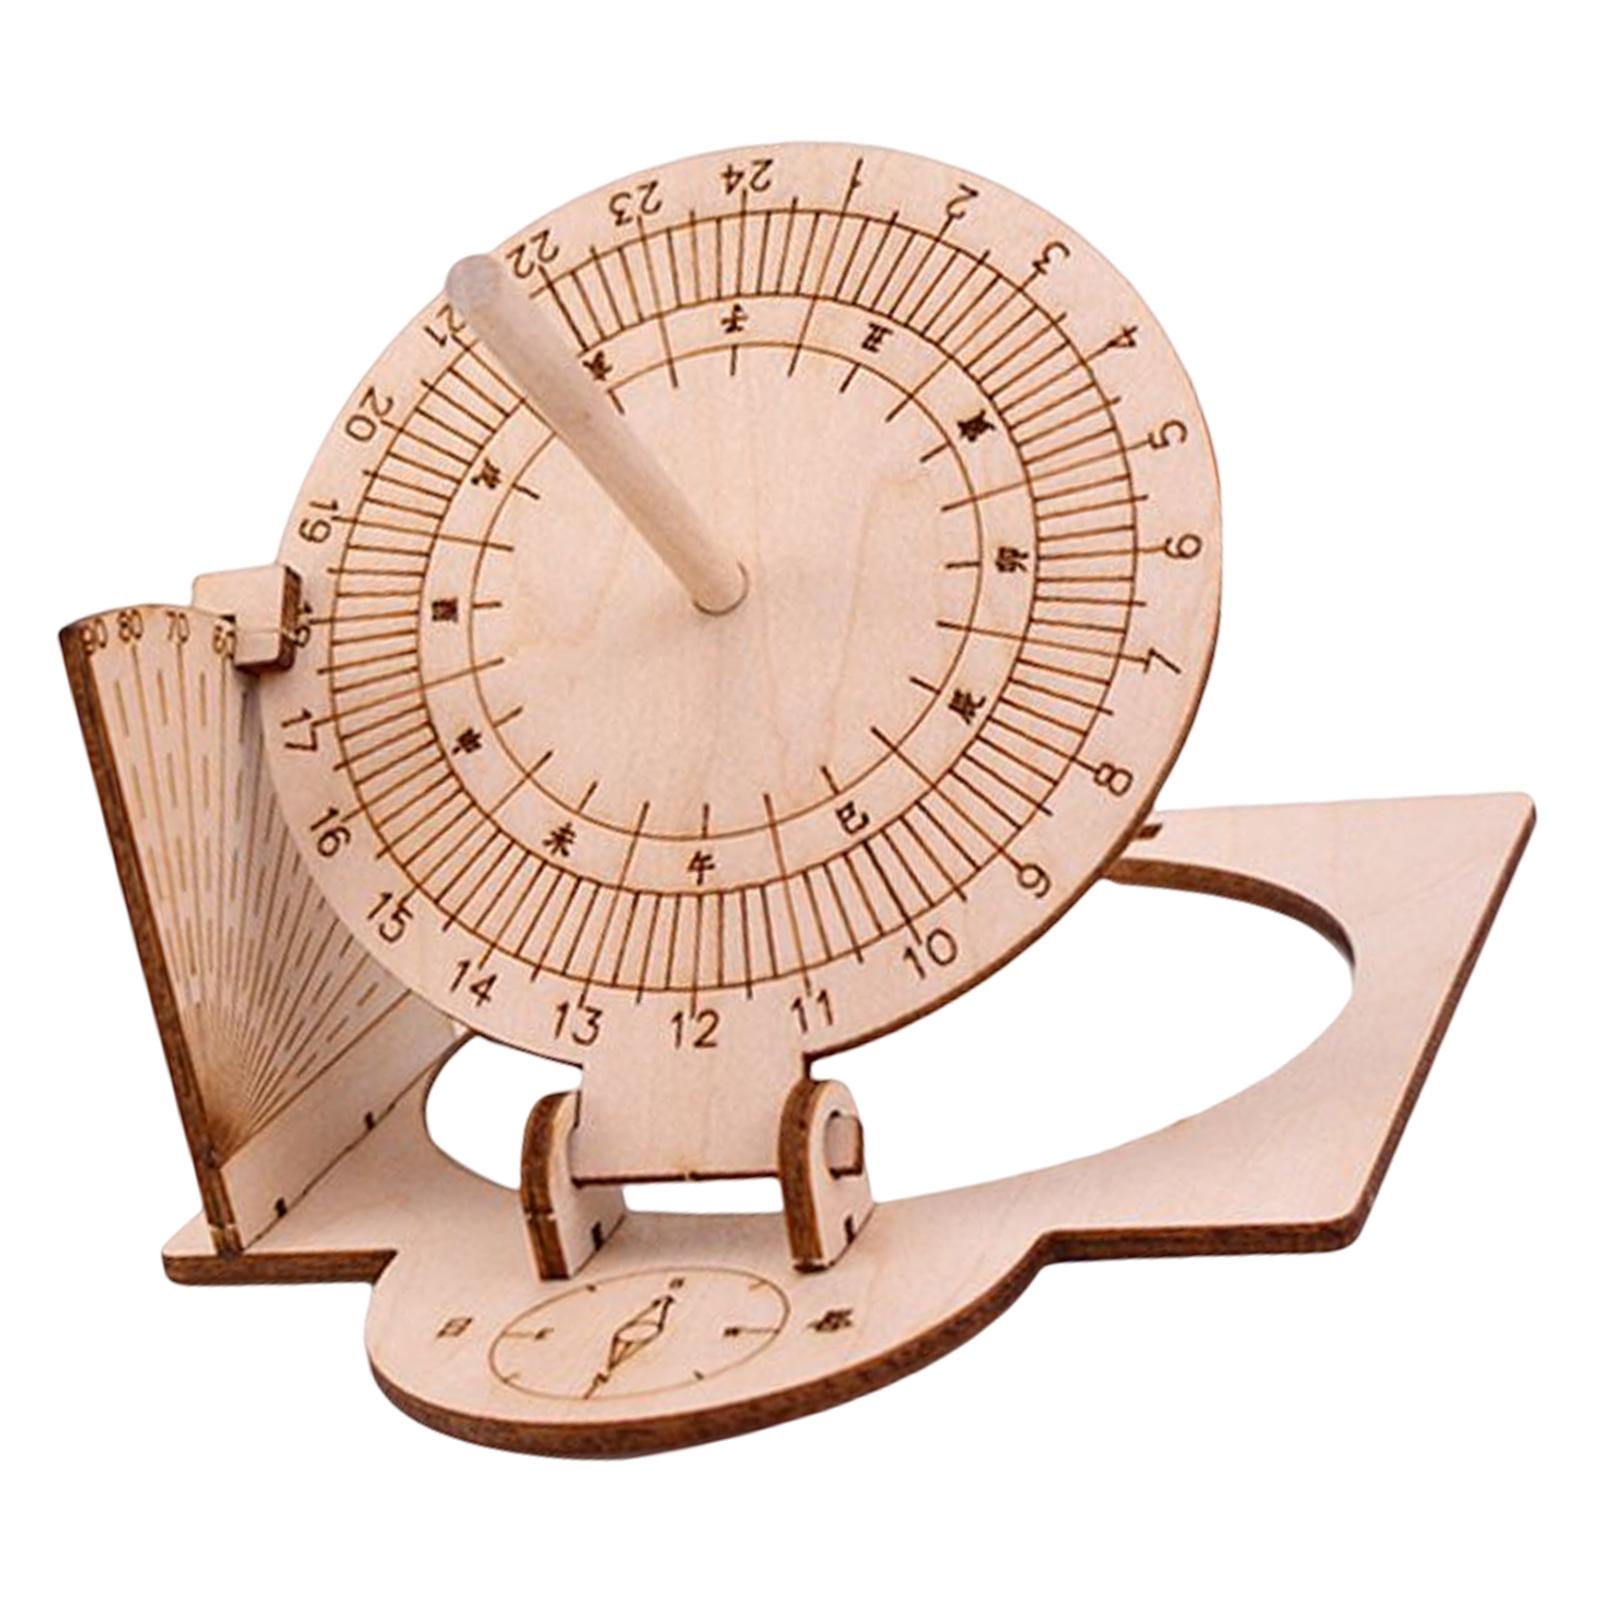 Equatorial Sundial Clock DIY Wooden Building for Adults and Children Experiment Equipment Durable Manual Assembly Model Teaching Aid - image 2 of 6